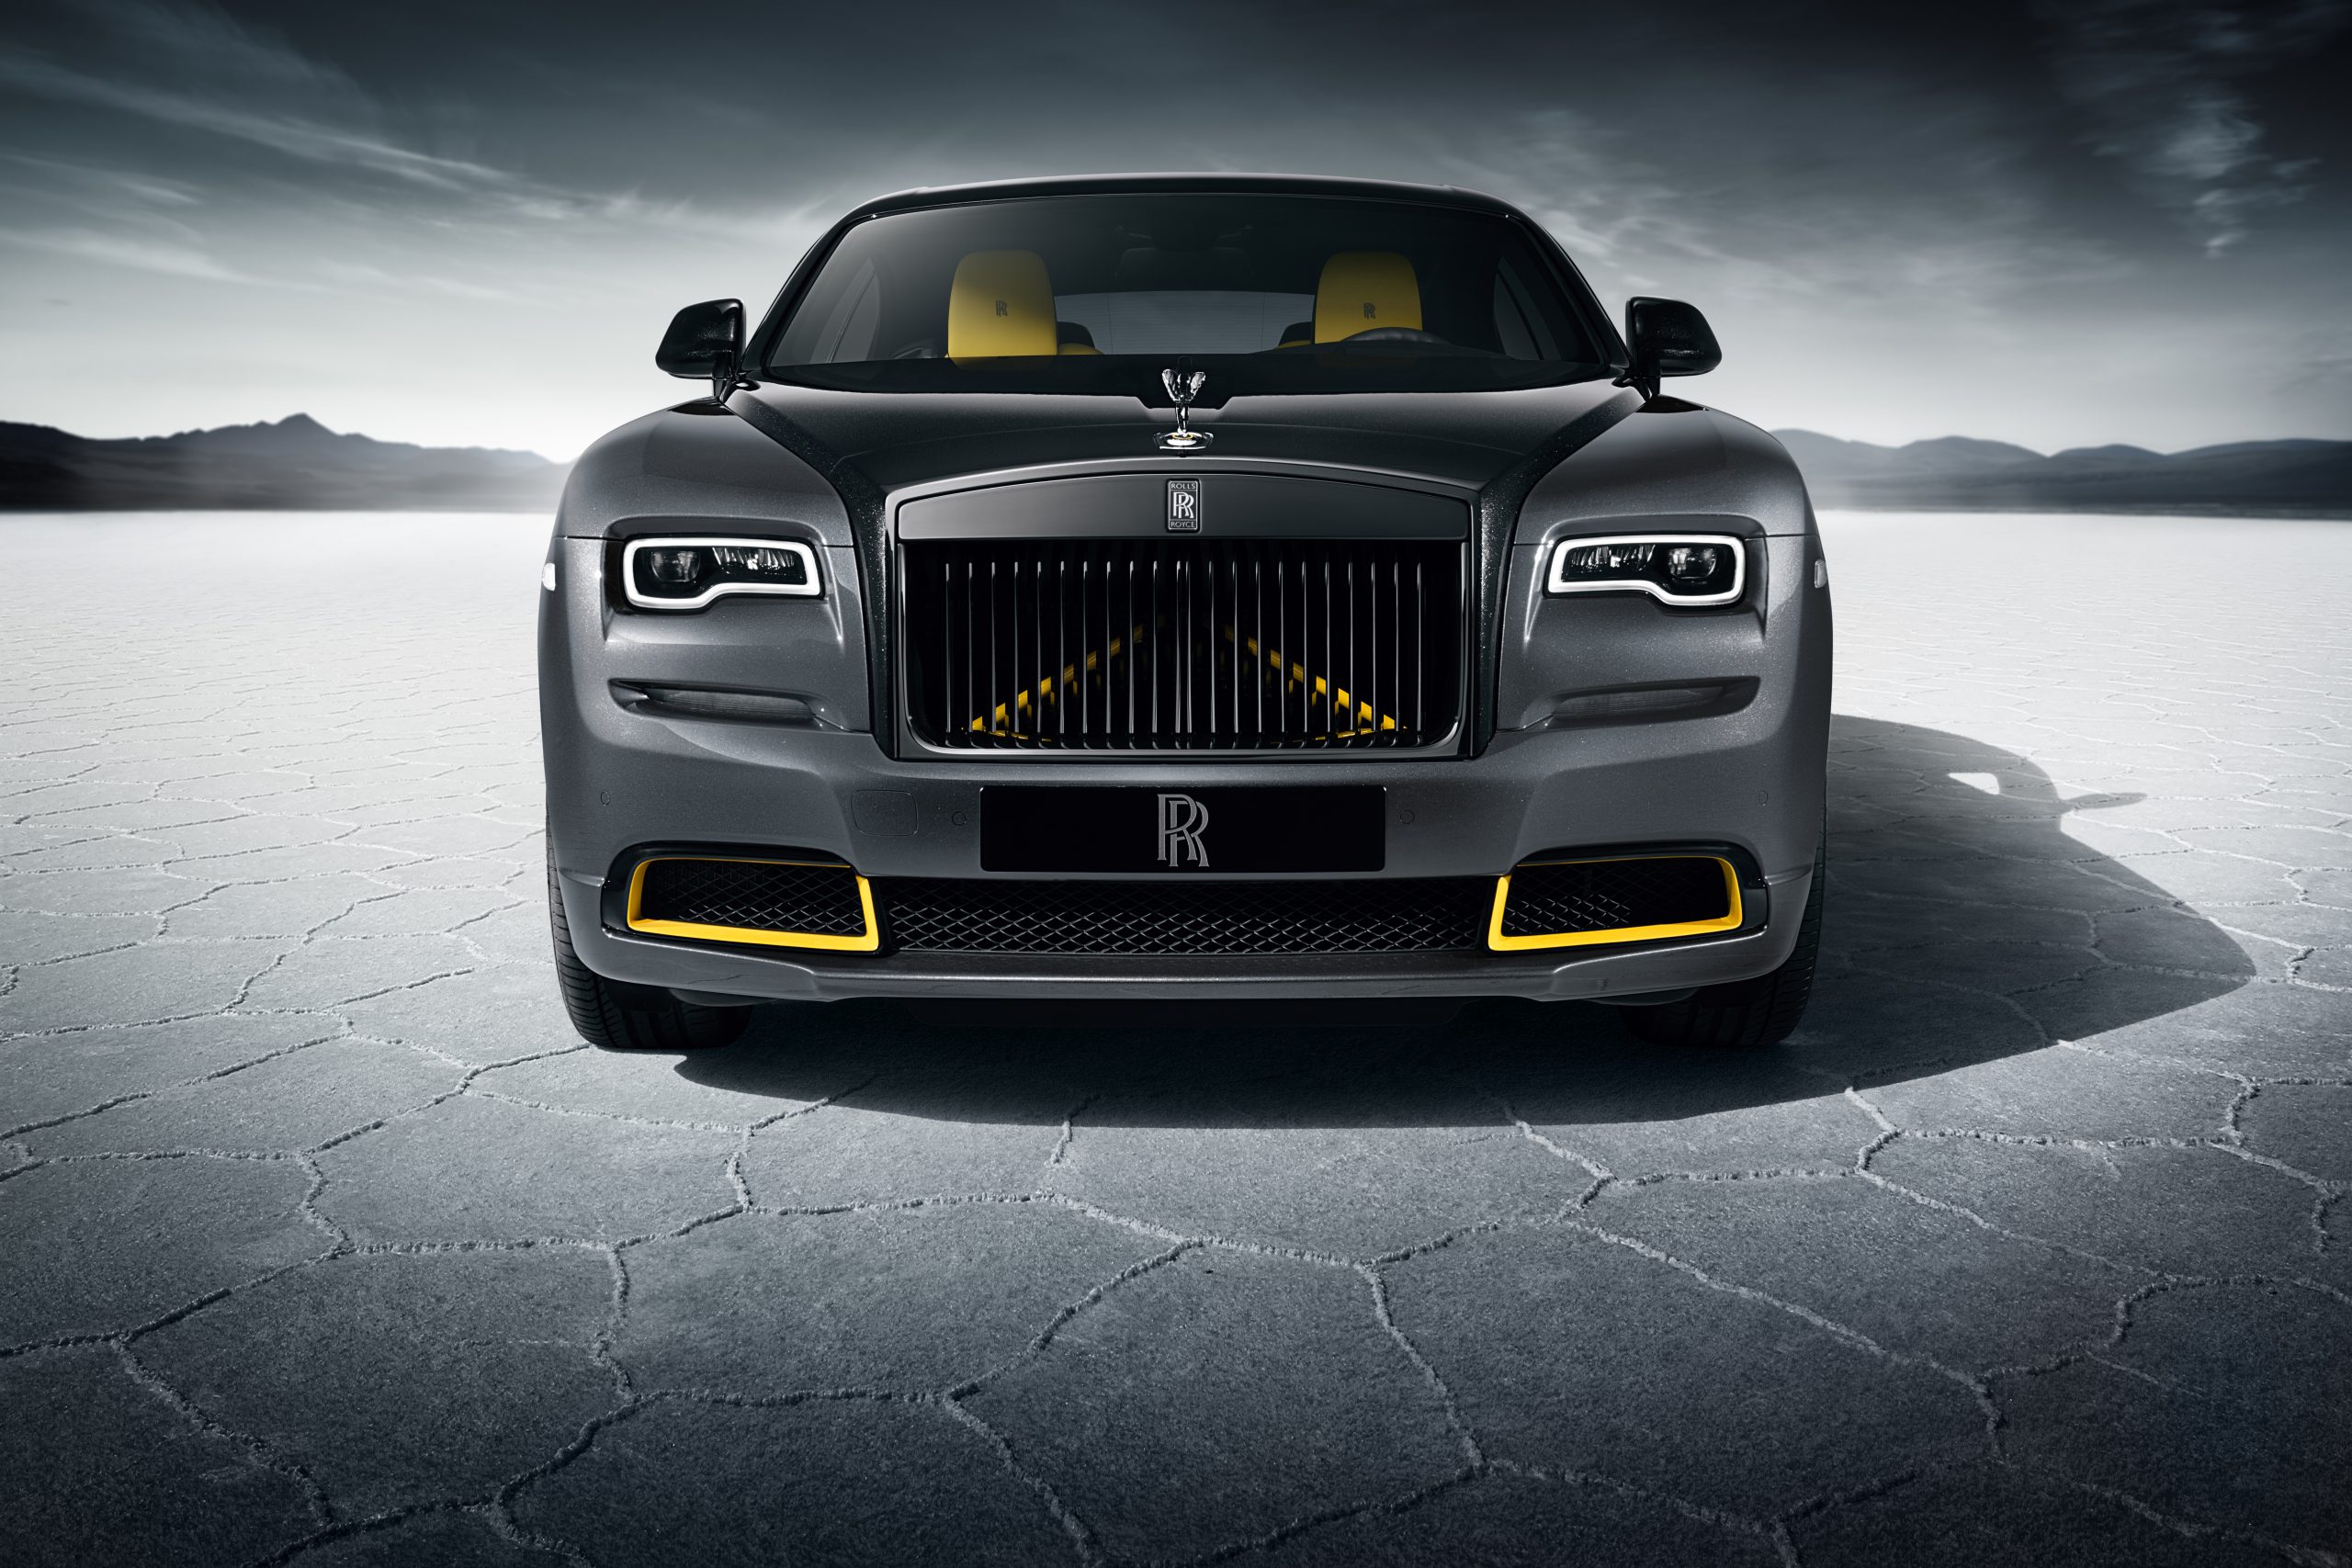 The Black Arrow is a powerful parting shot for the Rolls-Royce Wraith